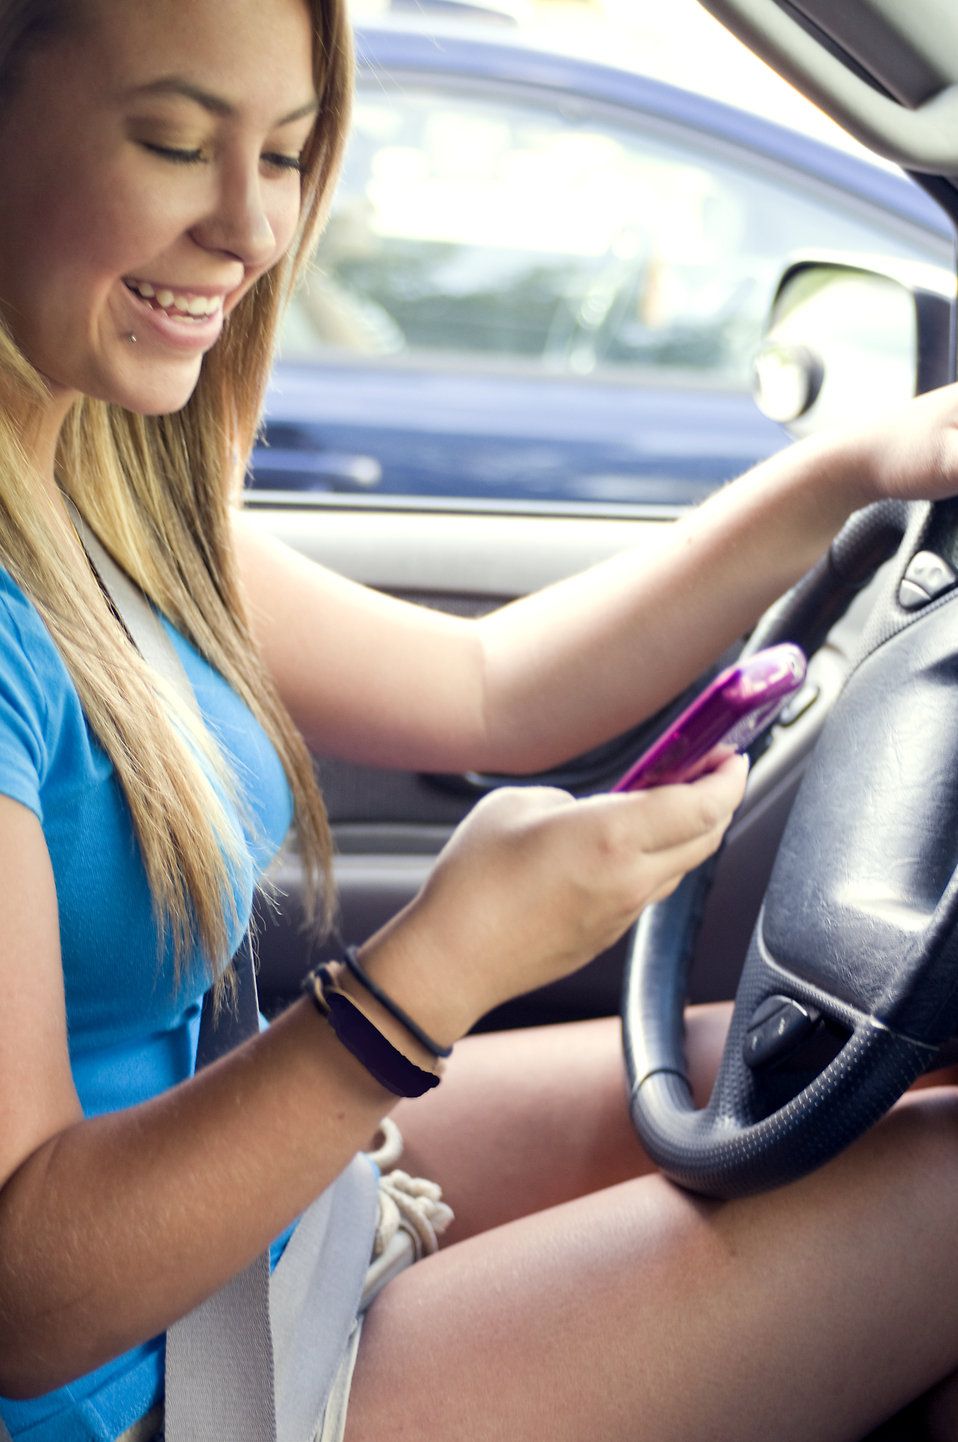 texting and driving more dangerous than drinking and driving